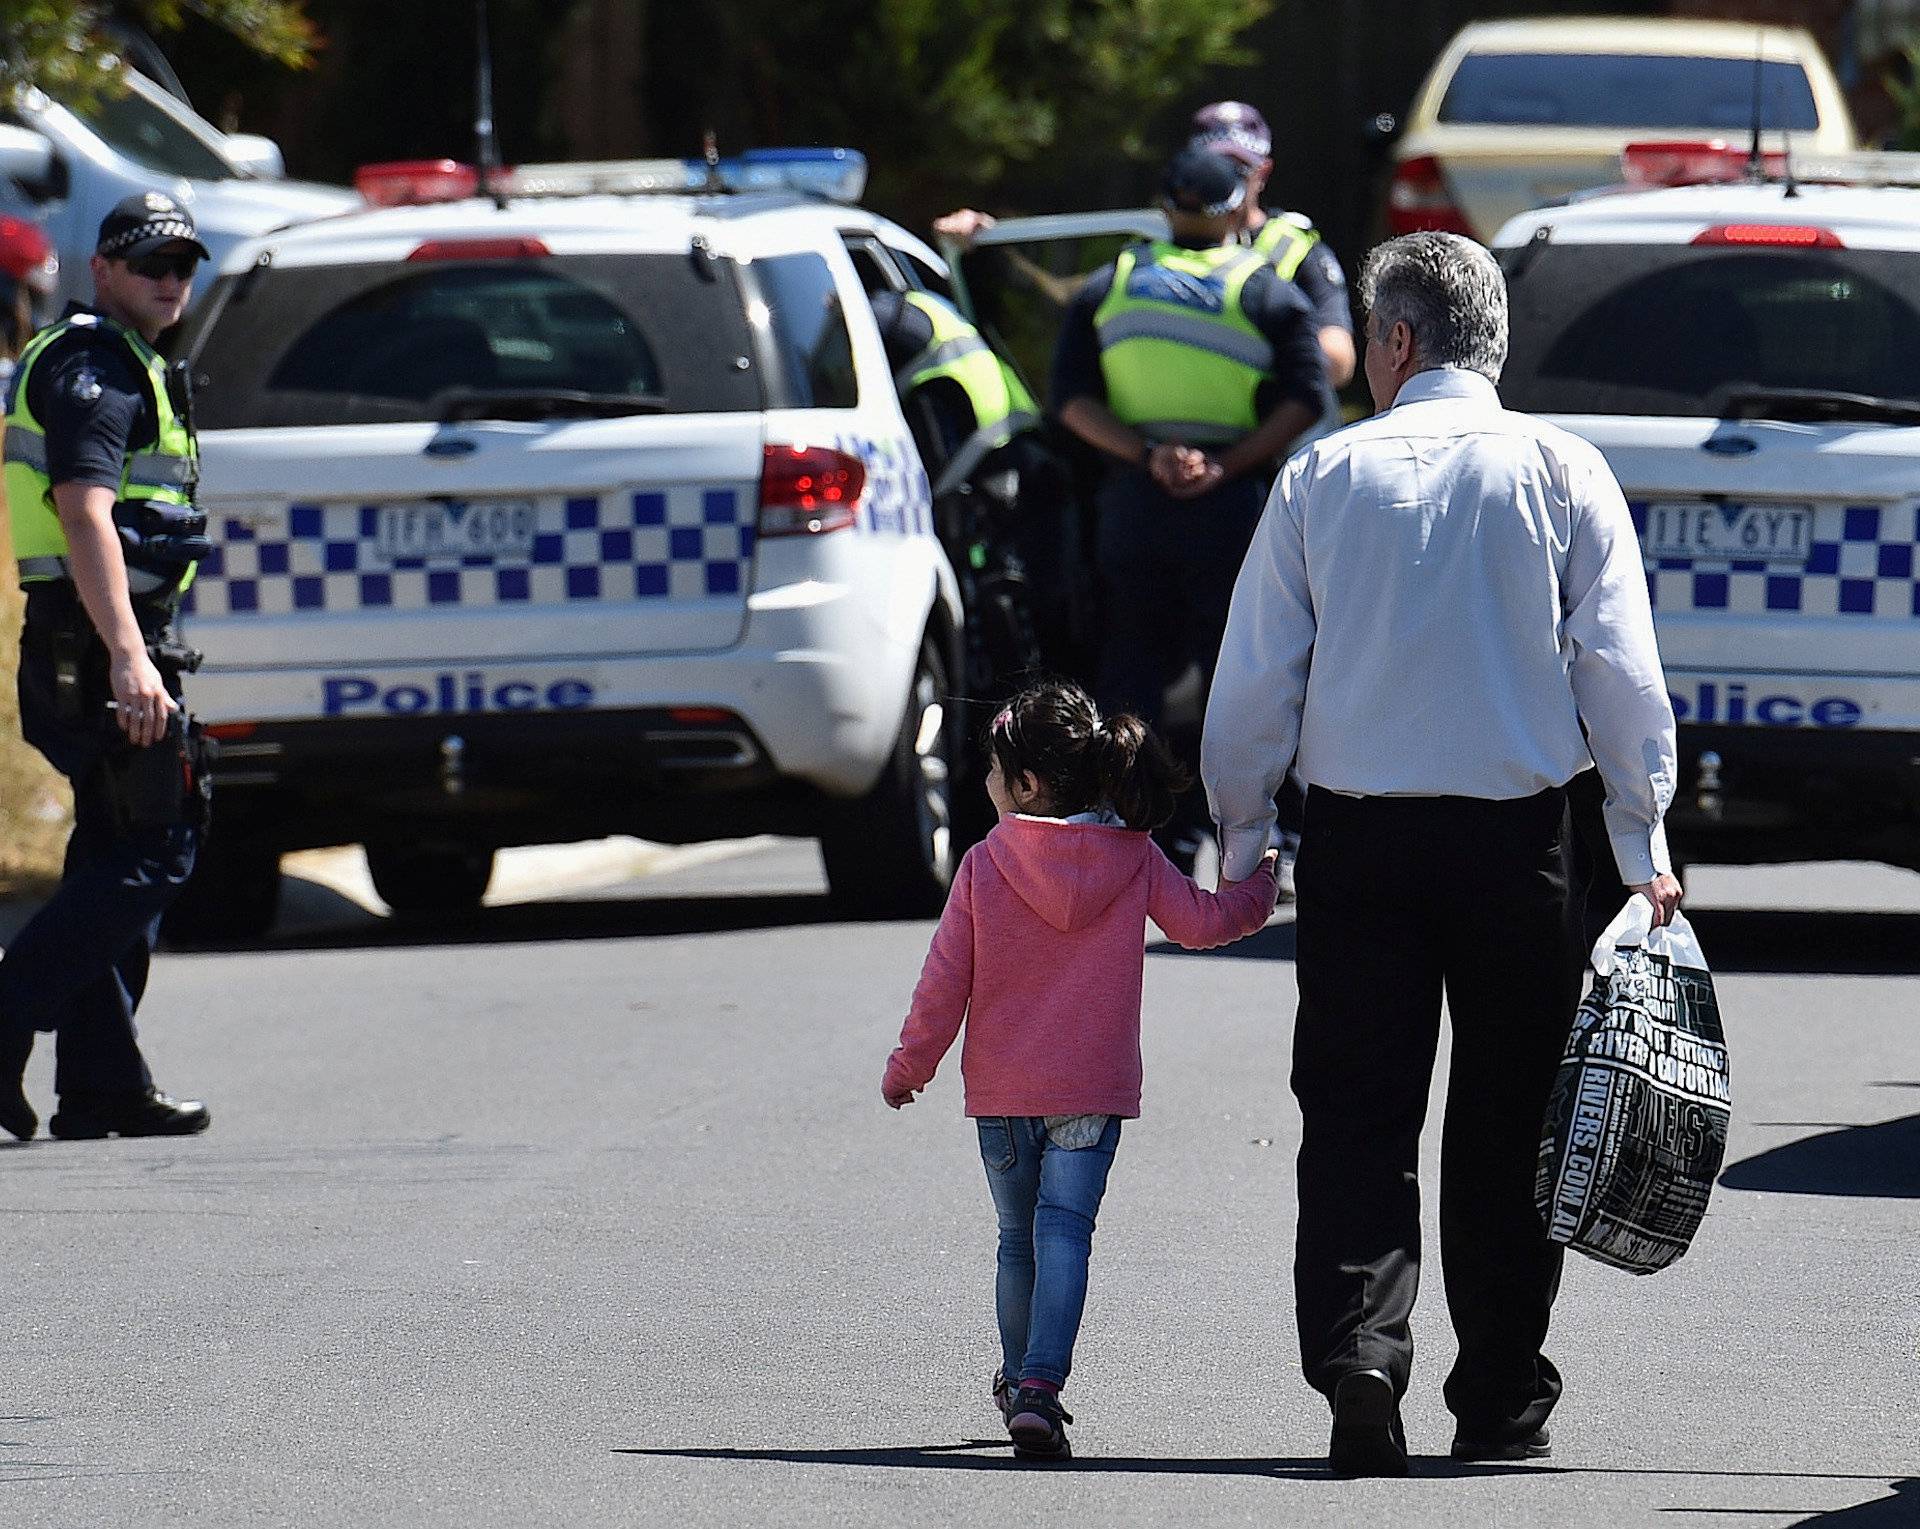 A man and a girl walk towards policemen as they block the road during the search of a house in the Melbourne suburb of Meadow Heights, Australia